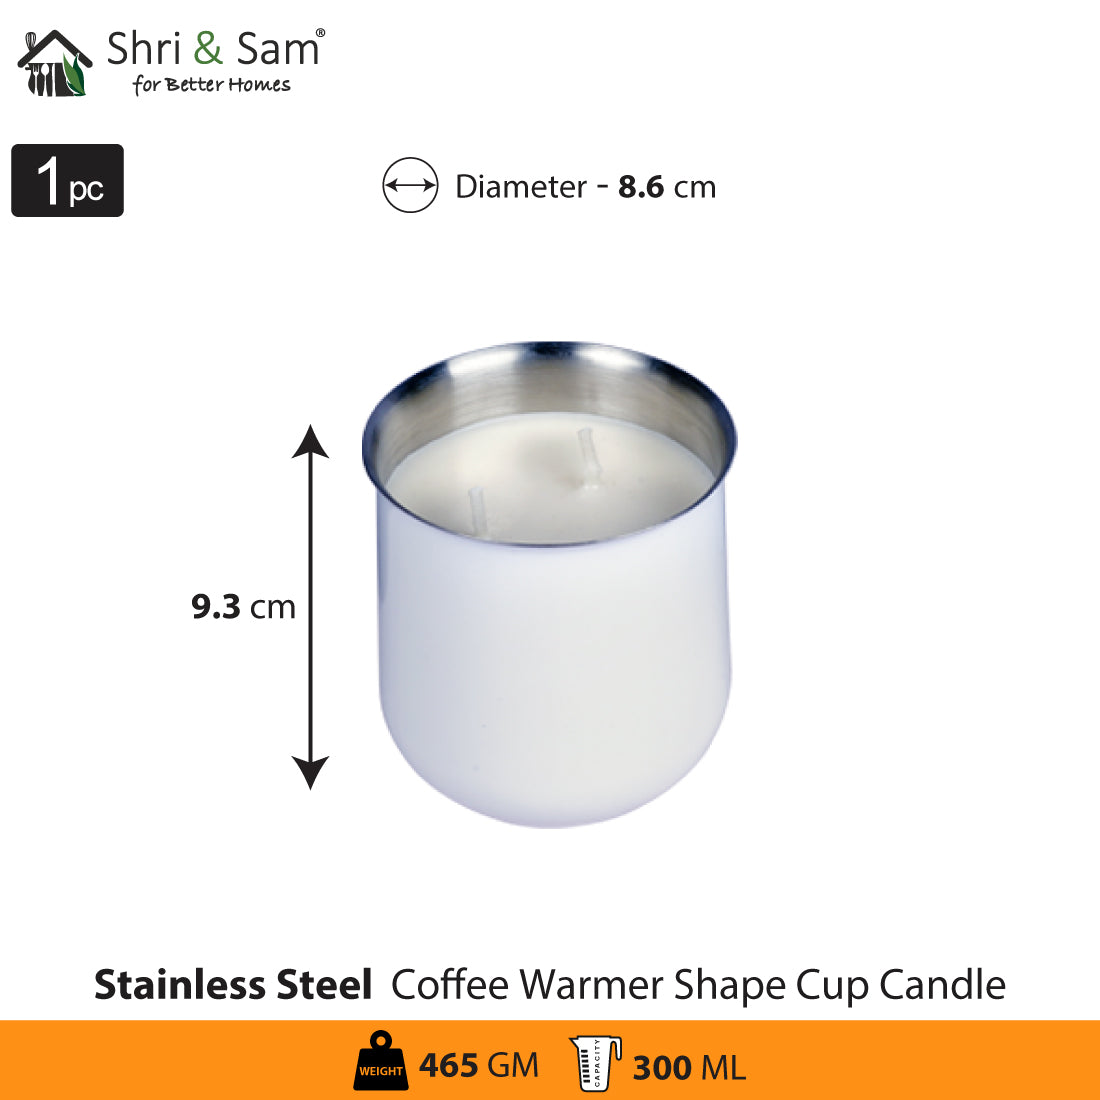 Stainless Steel Double Wick Coffee Warmer Shape Candle